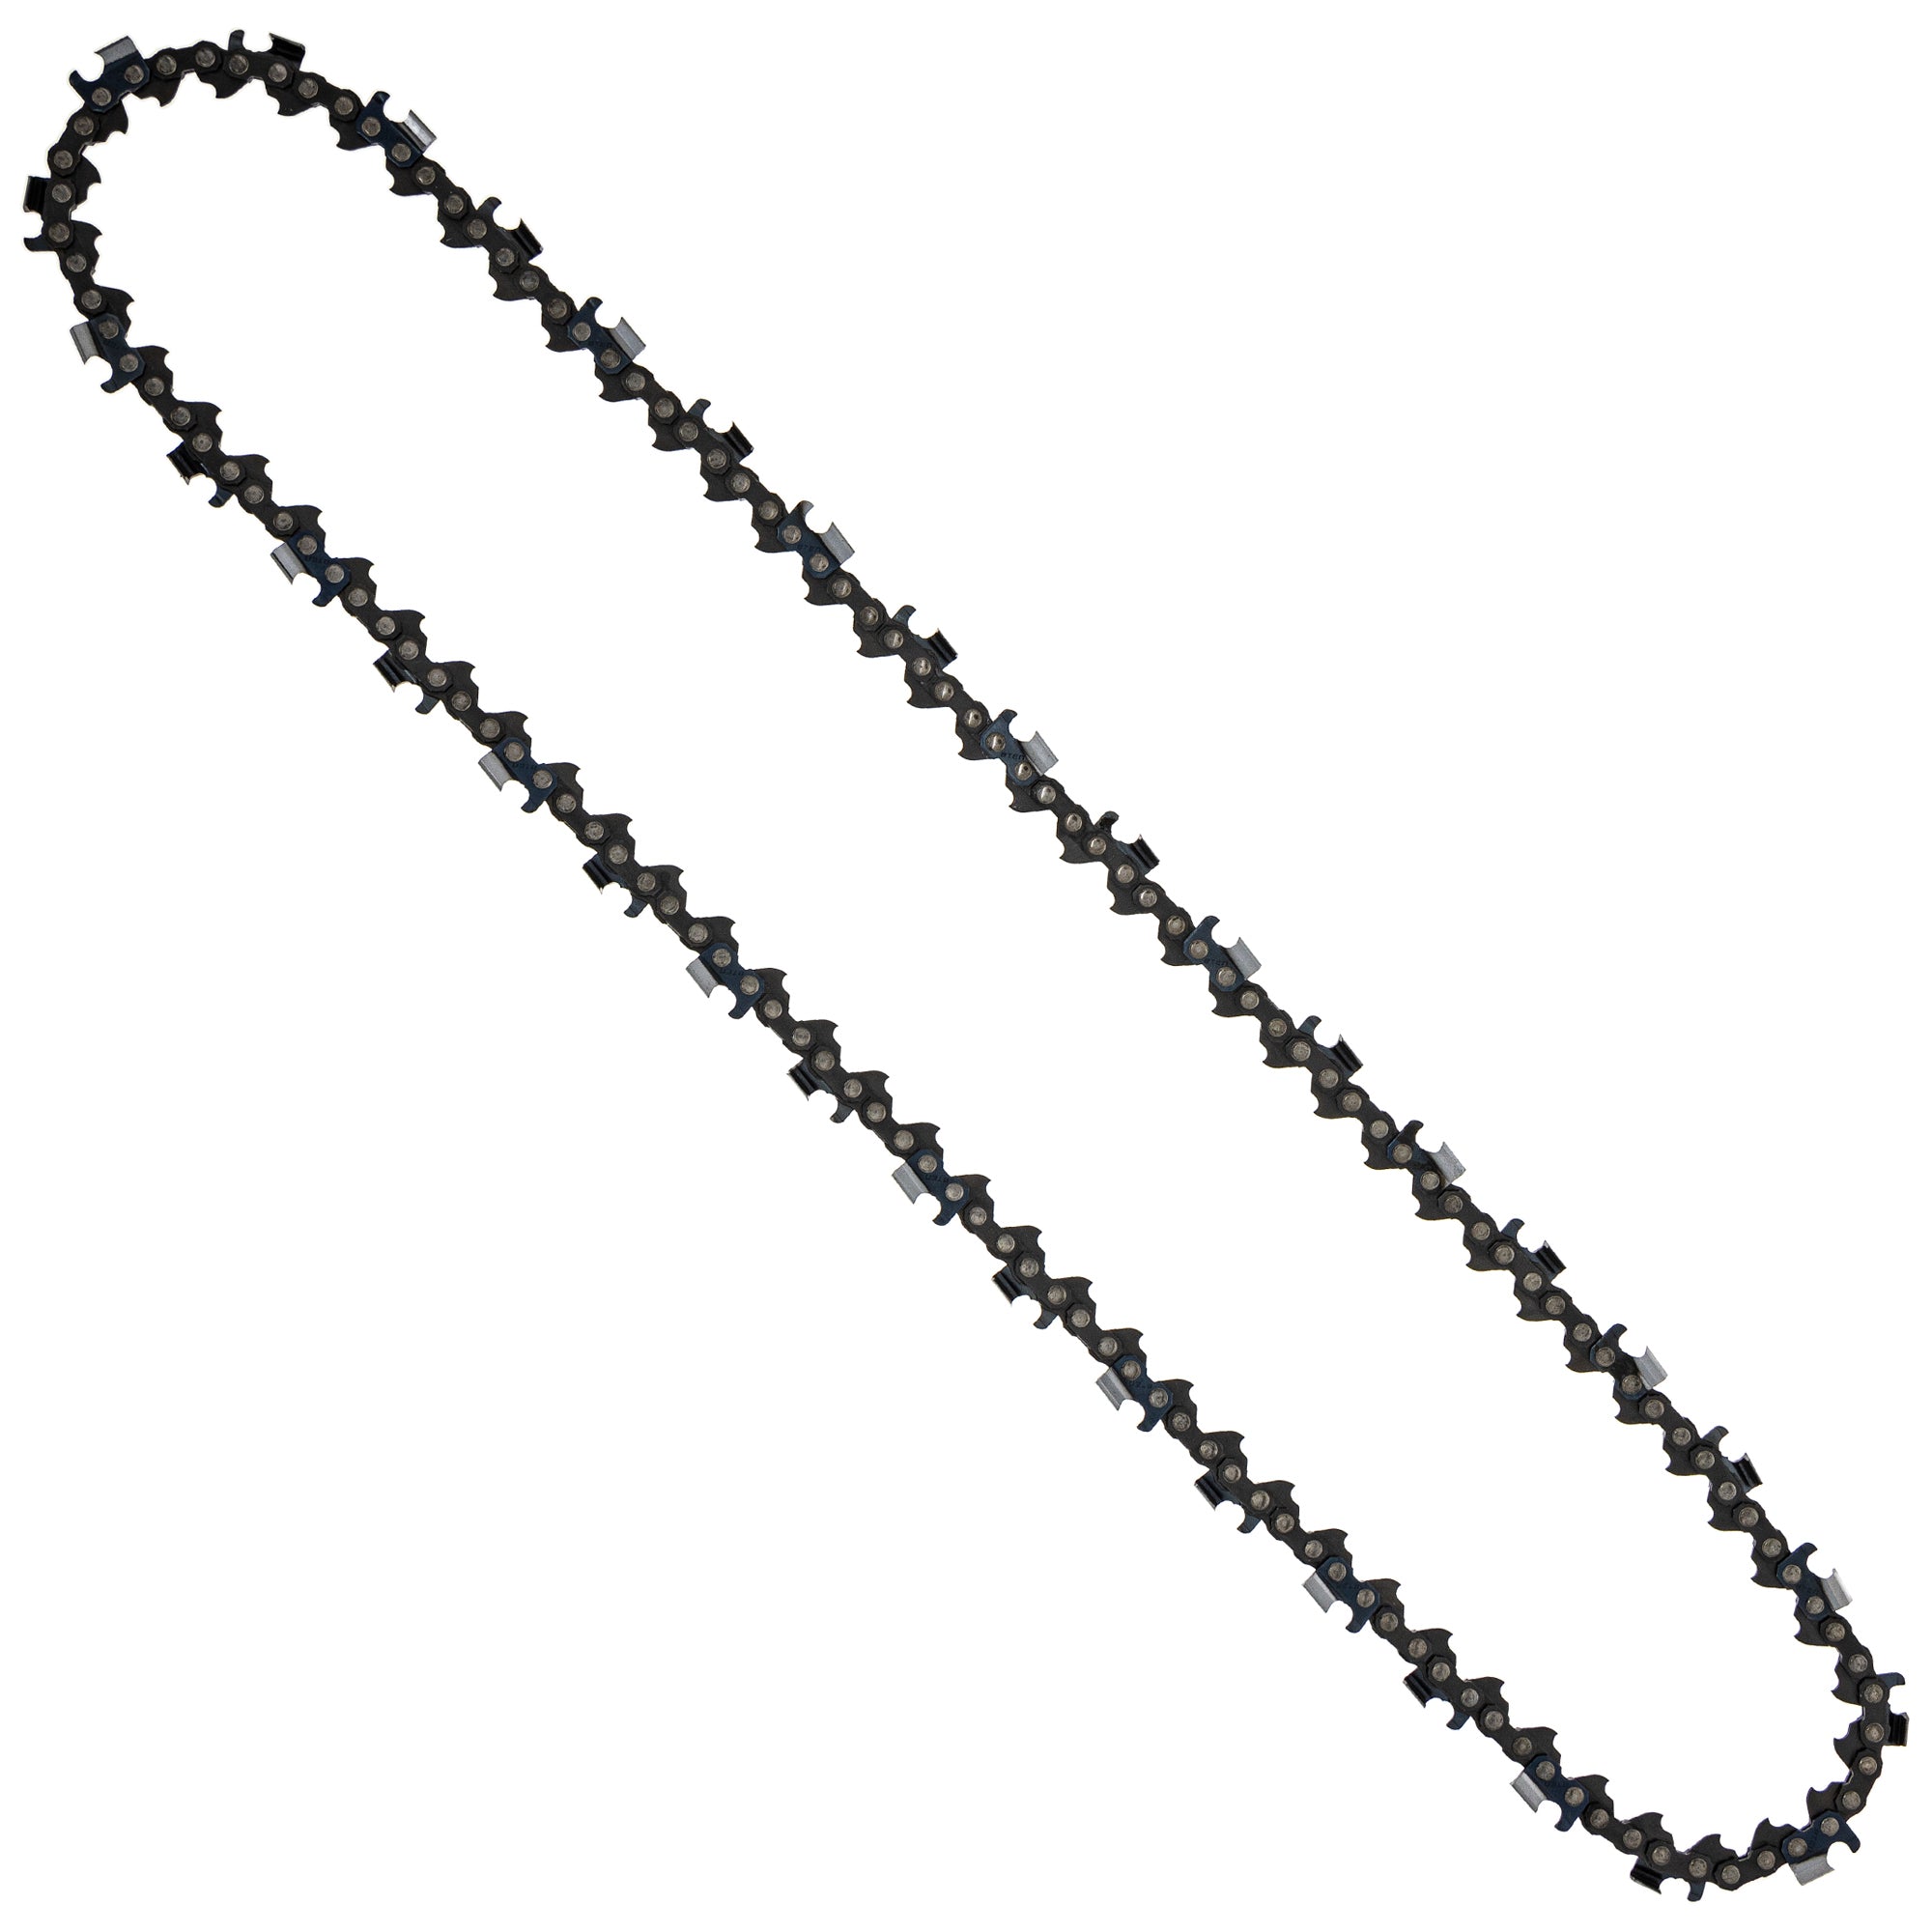 8TEN 810-CCC2255H Chain 3-Pack for zOTHER Ref No Oregon Husqvarna